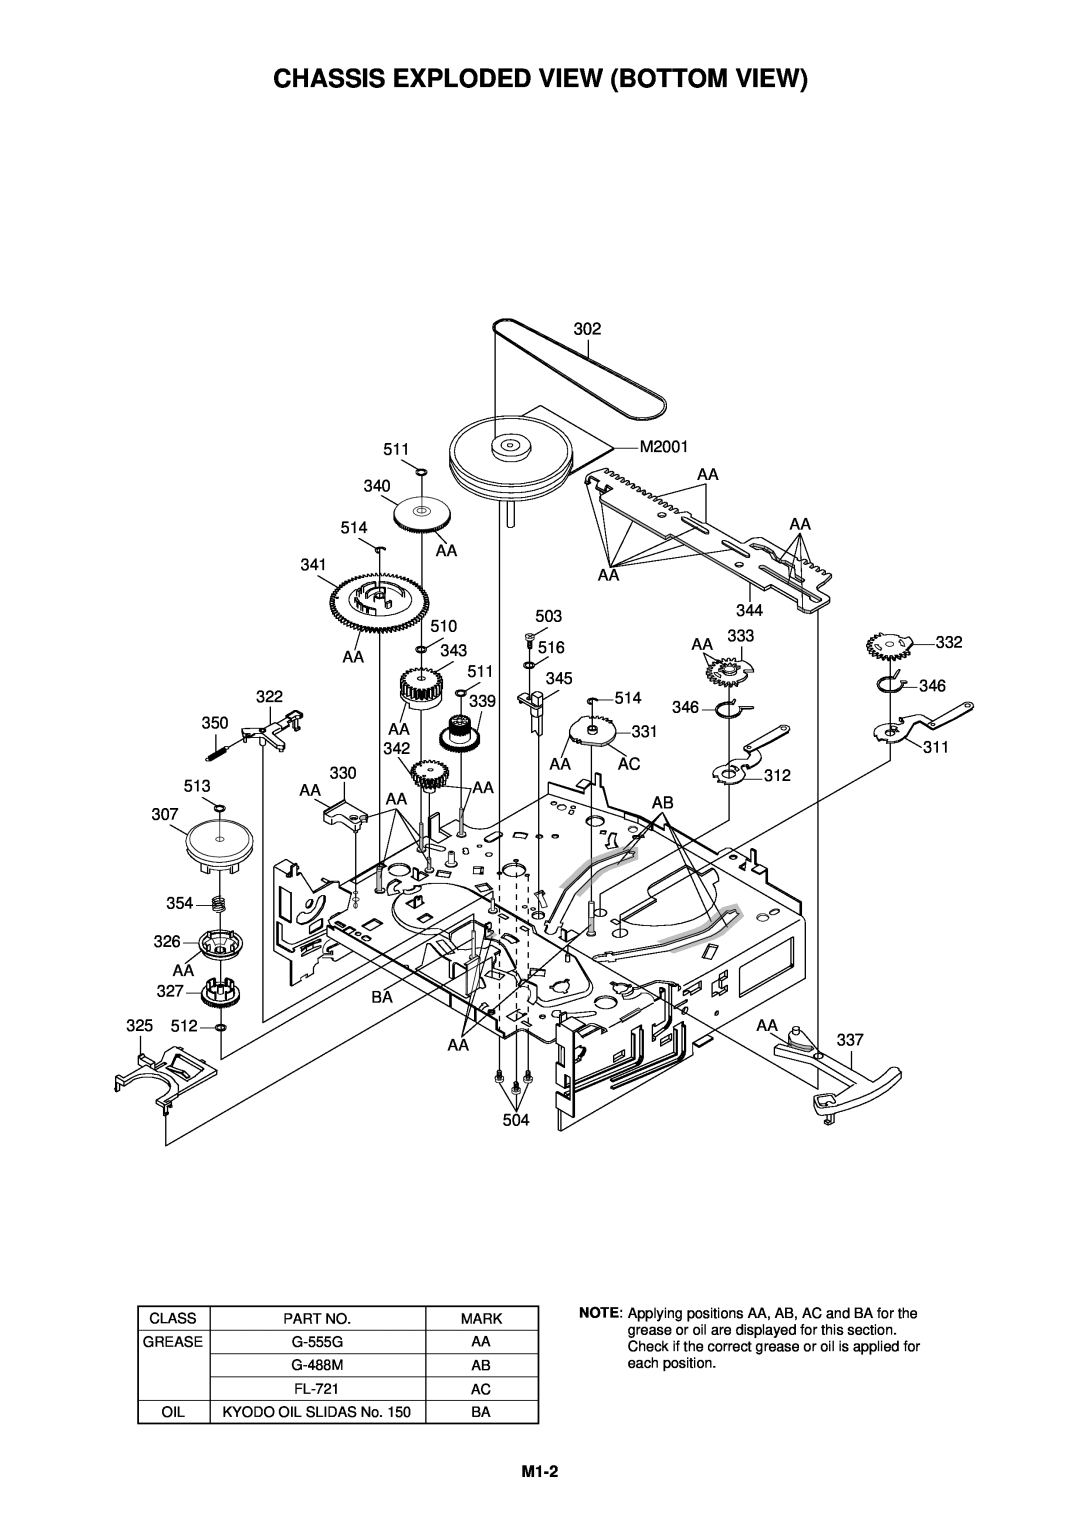 Aiwa HV-FX5100 service manual Chassis Exploded View Bottom View, M1-2 